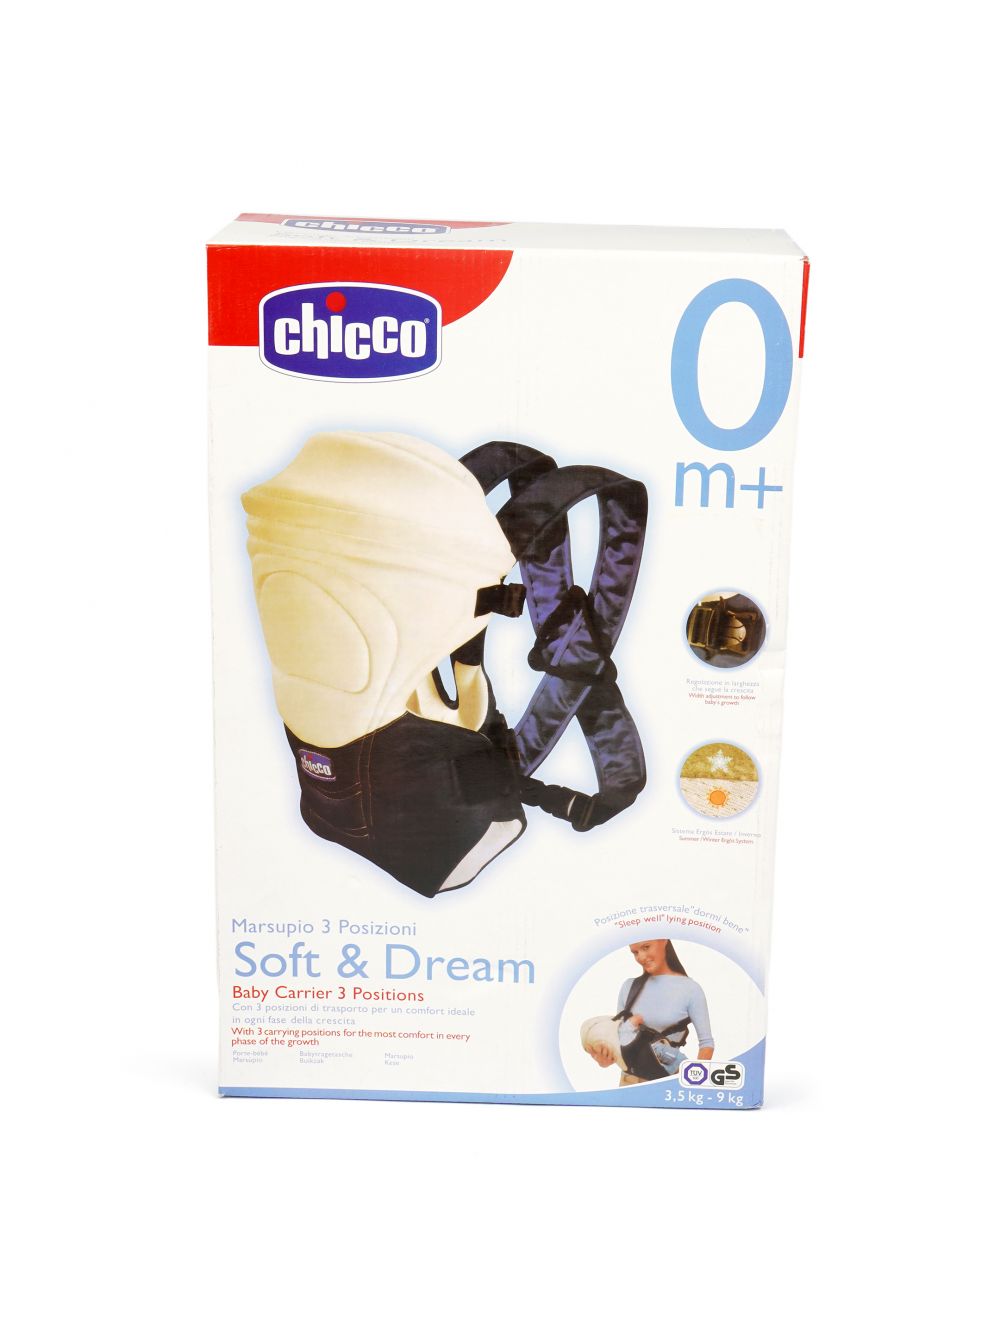 Chicco Soft & Dream 3 Positoins Baby Carrier